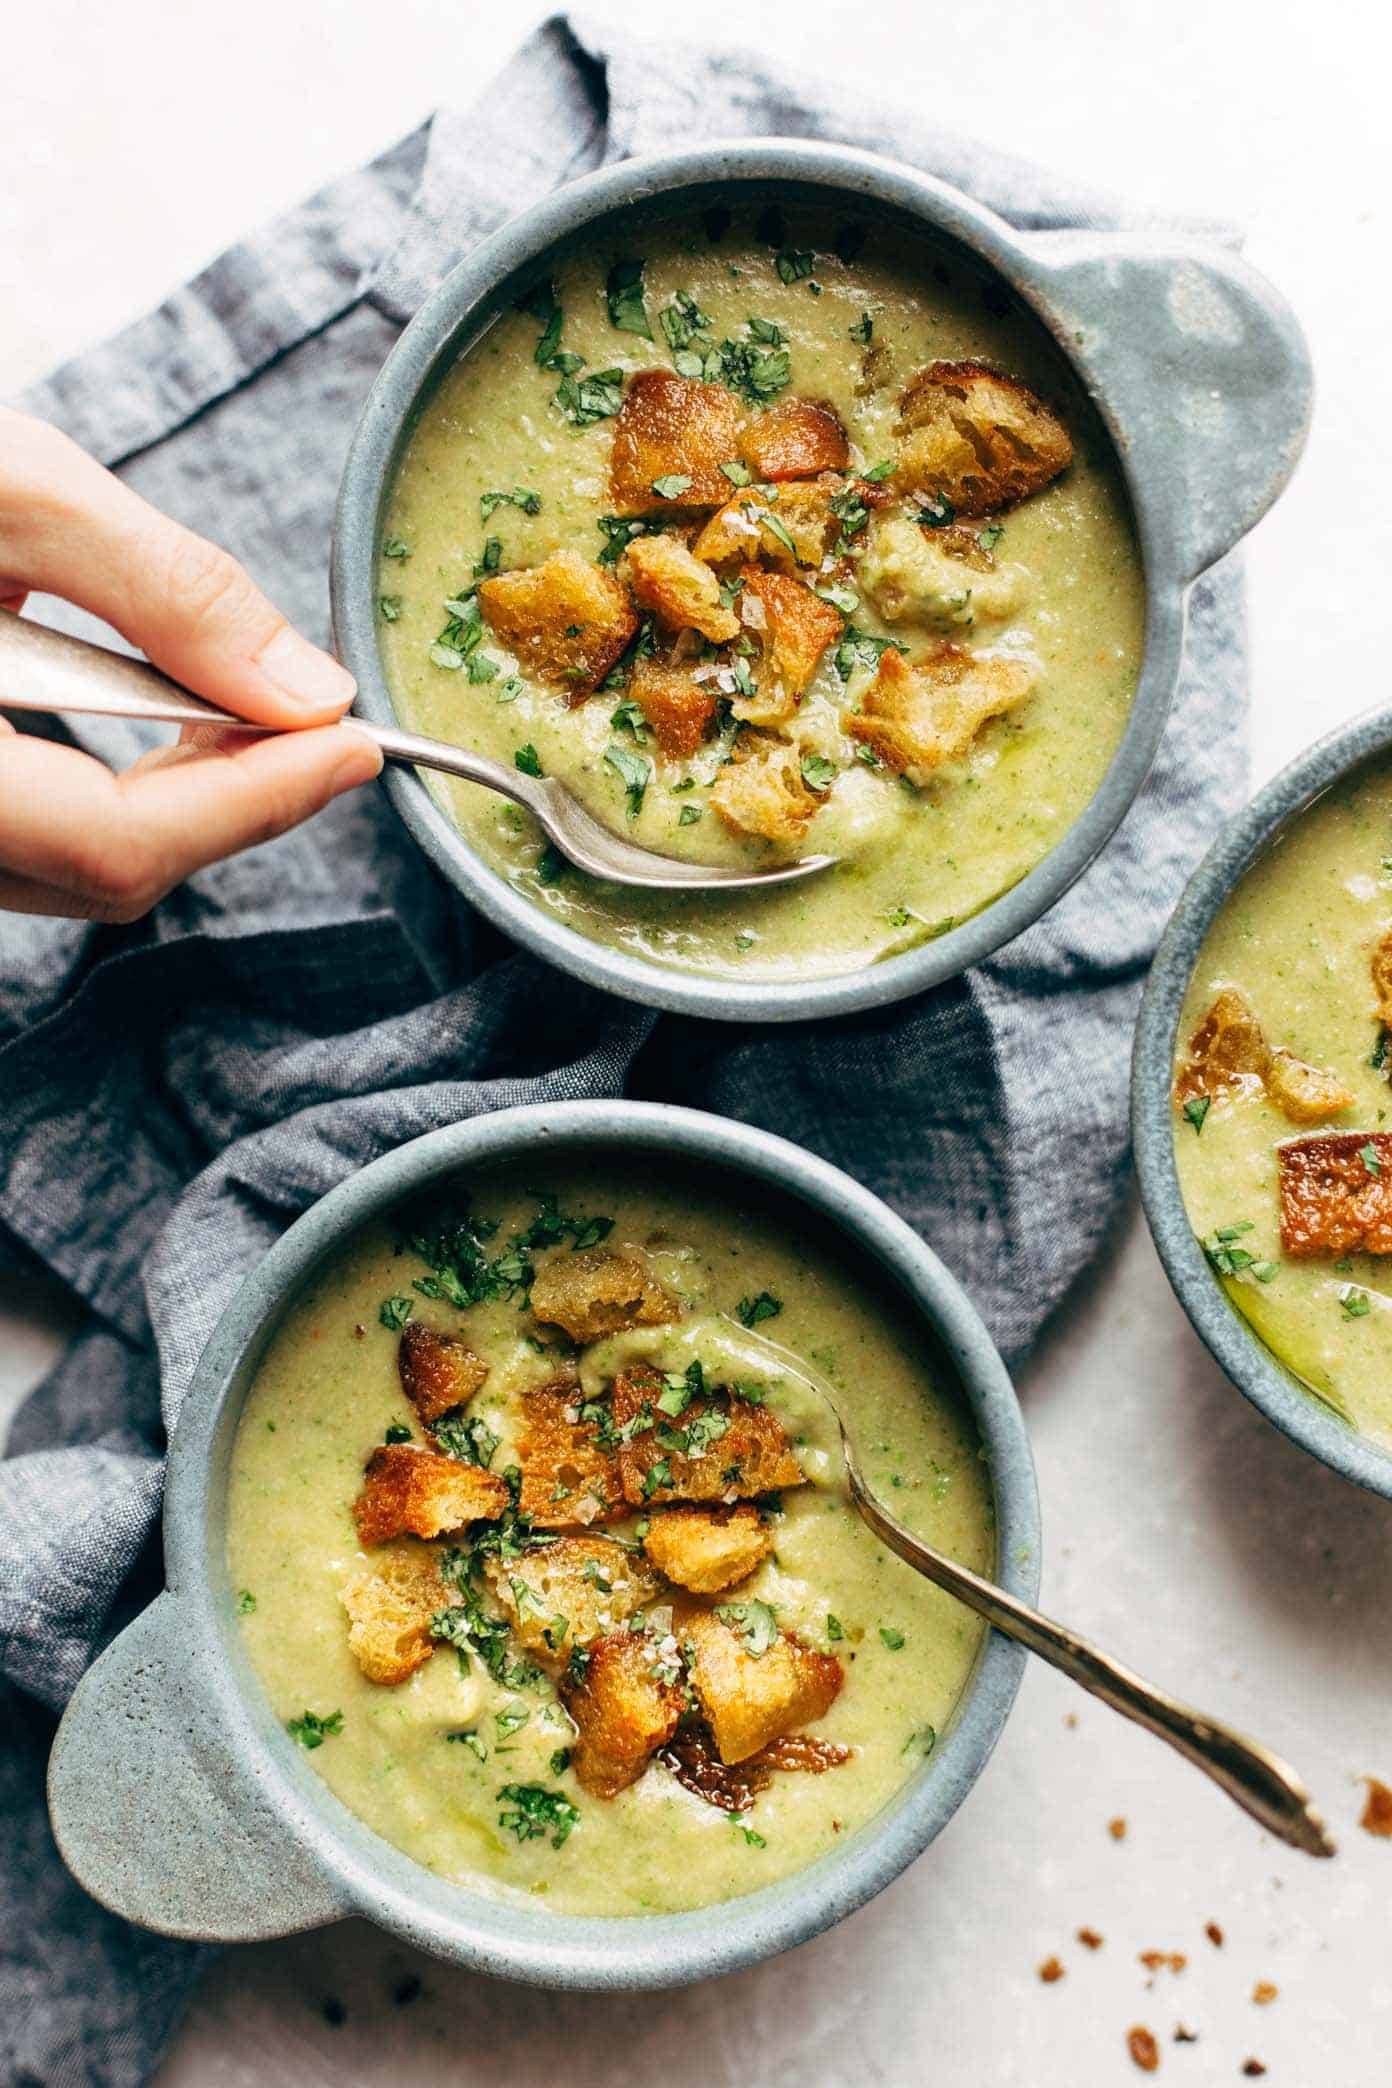 Vegan broccoli cheese soup in bowls.